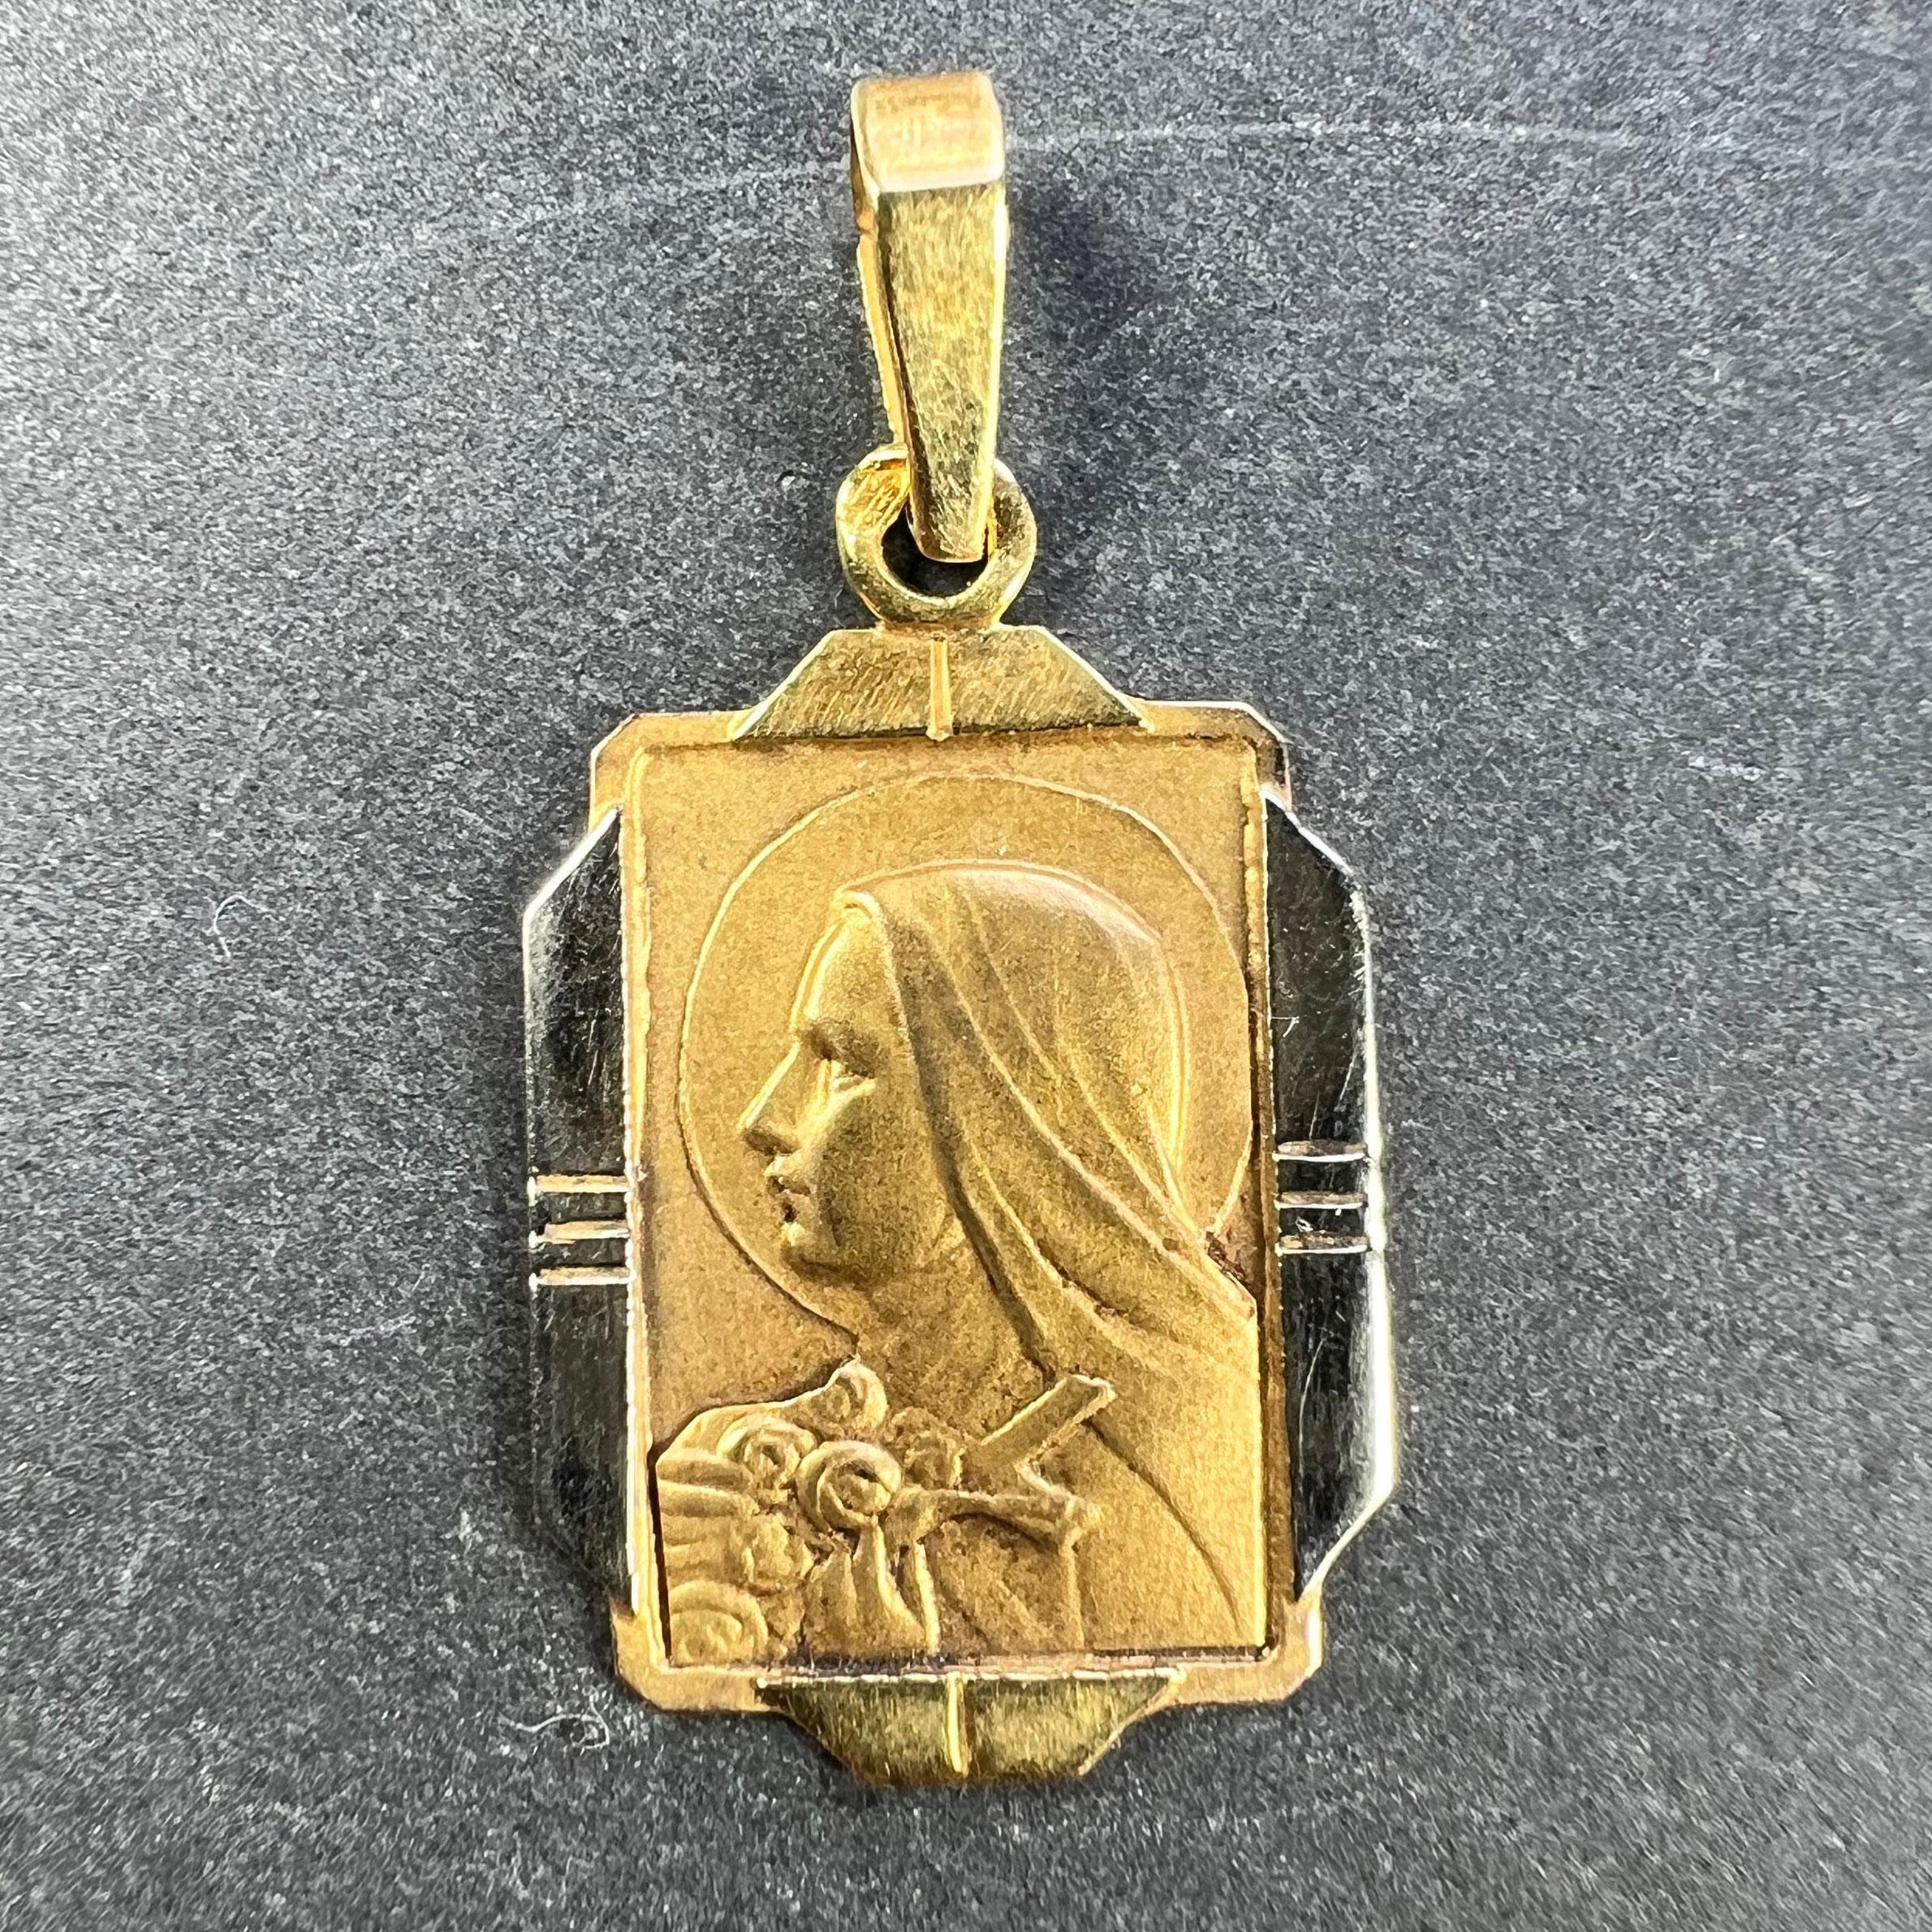 A French 18 karat (18K) yellow gold charm pendant designed as a rectangular medal depicting St Therese holding a crucifix within a sheaf of roses to a rectangular surround with a white gold ridged frame. Stamped with the eagle's head for French